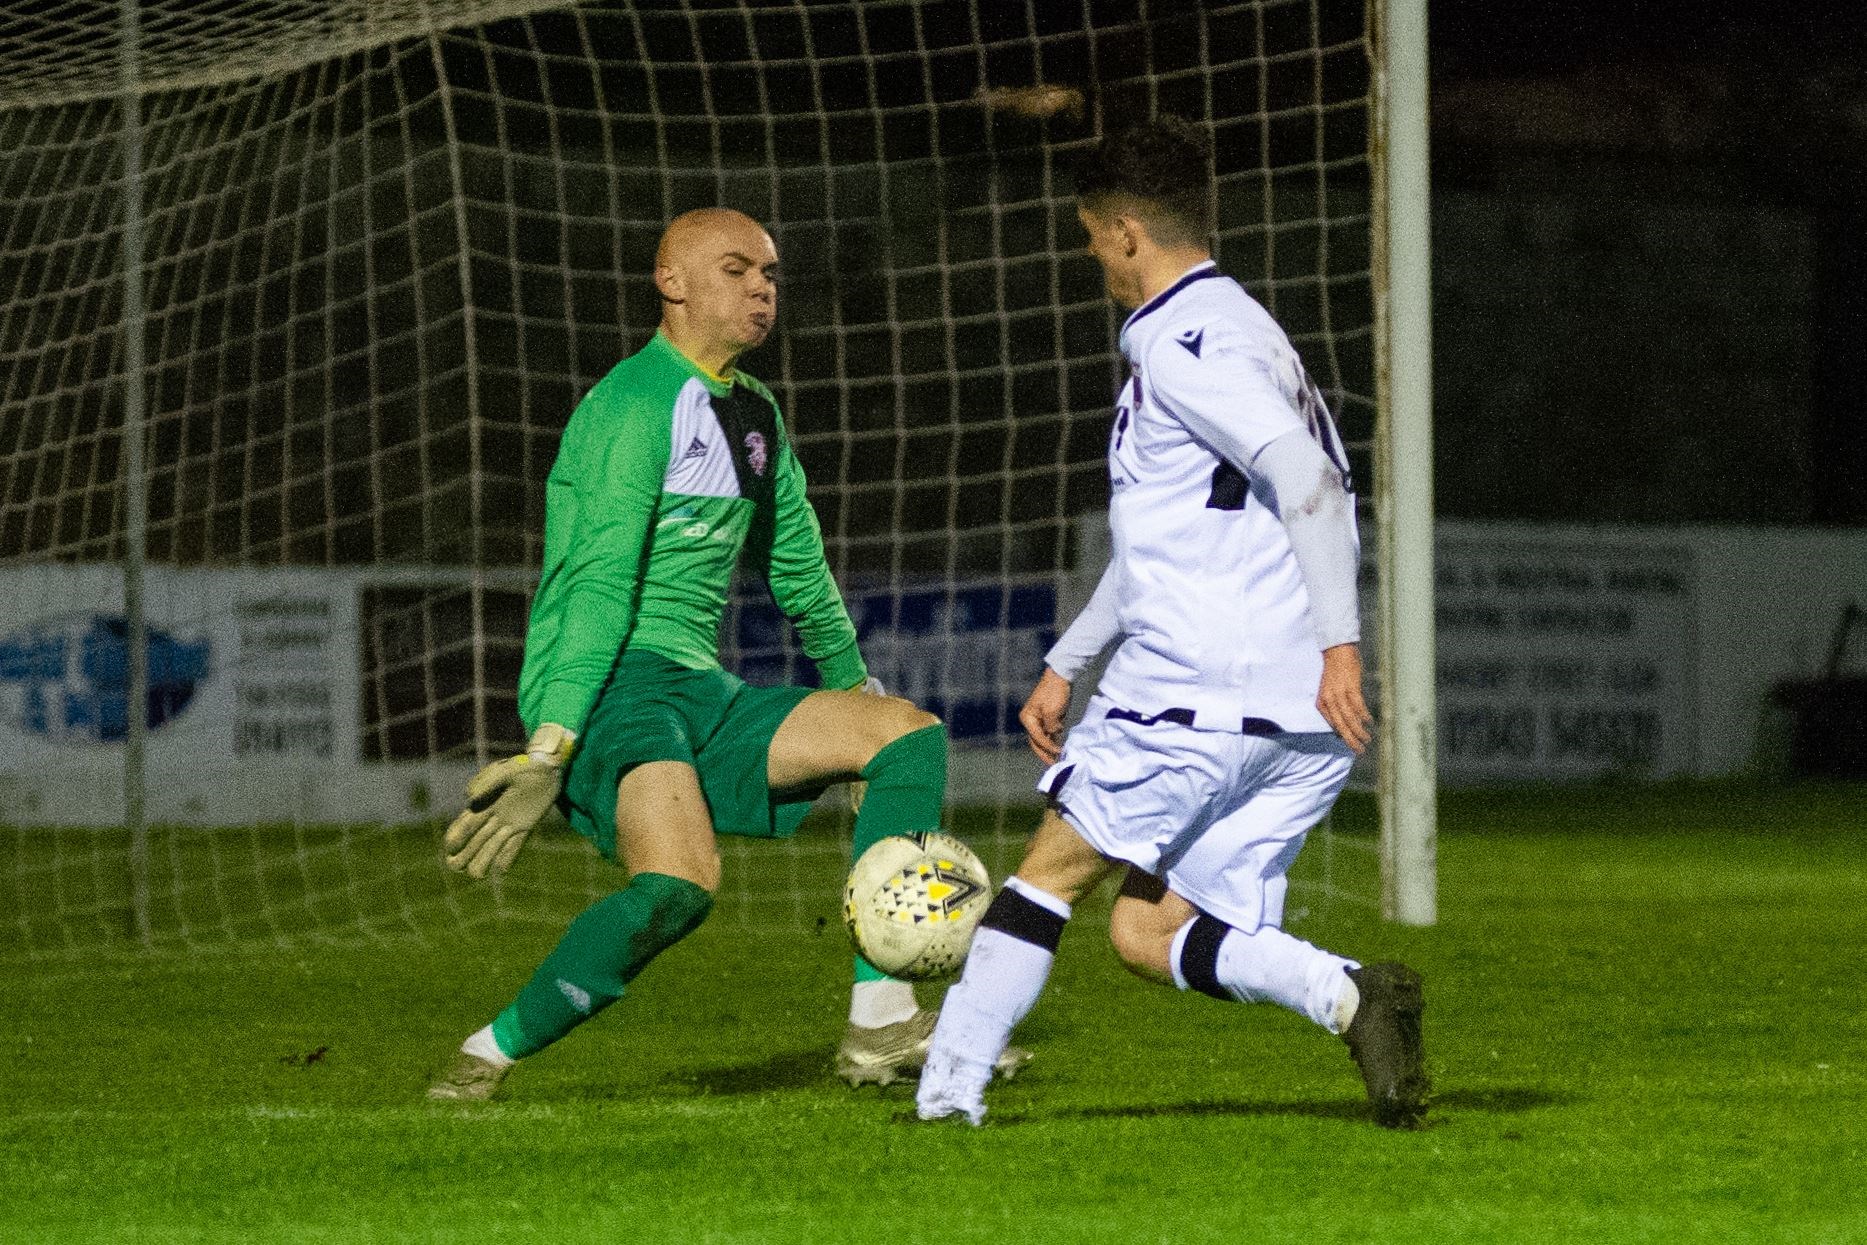 Another save from Lossiemouth keeper Logan Ross as he denies Rothes' Jack Brown...Lossiemouth FC (0) vs Rothes FC (1) - Grant Park, Lossiemouth 03/11/2021 - Highland Football League...Picture: Daniel Forsyth..